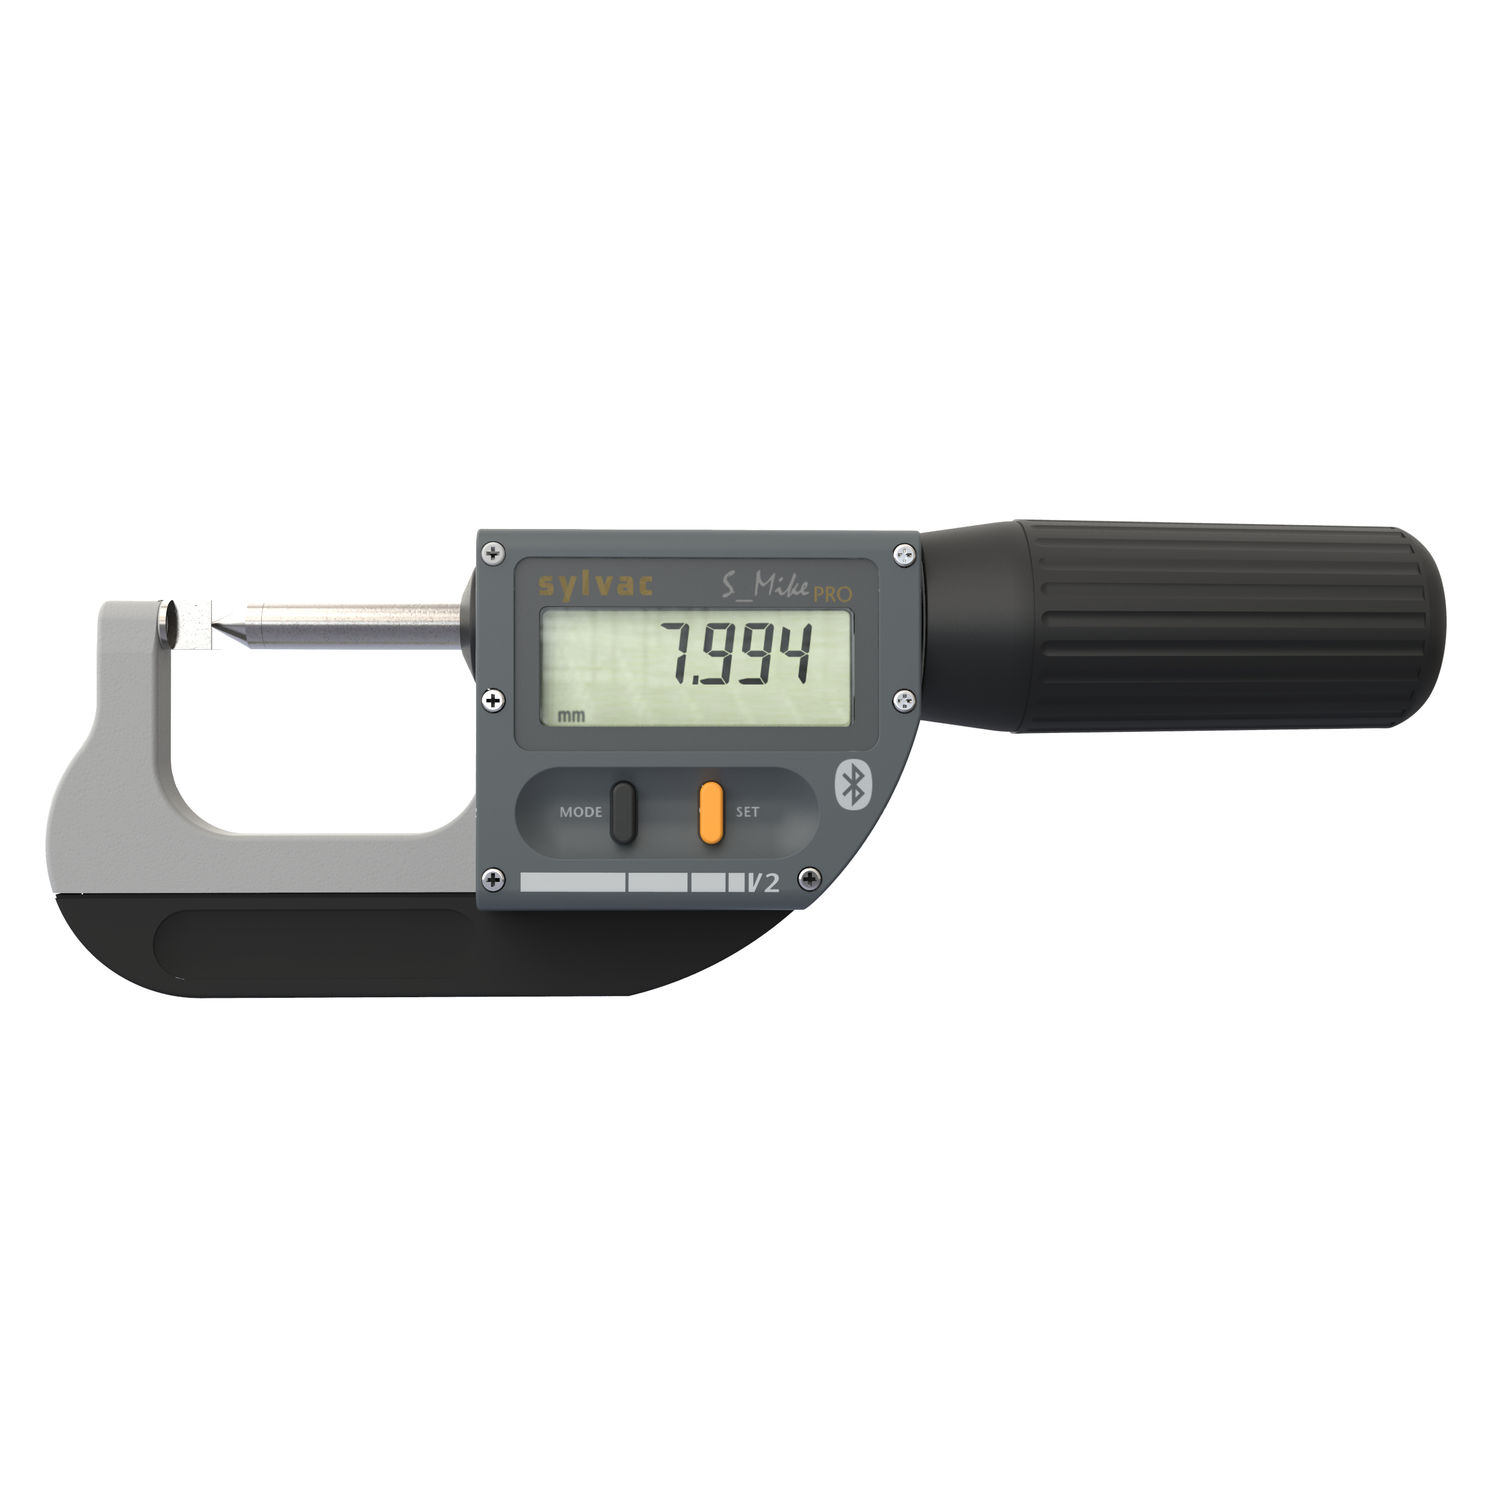 Sylvac Cable Crimping Micrometer S_Mike PRO BT IP67